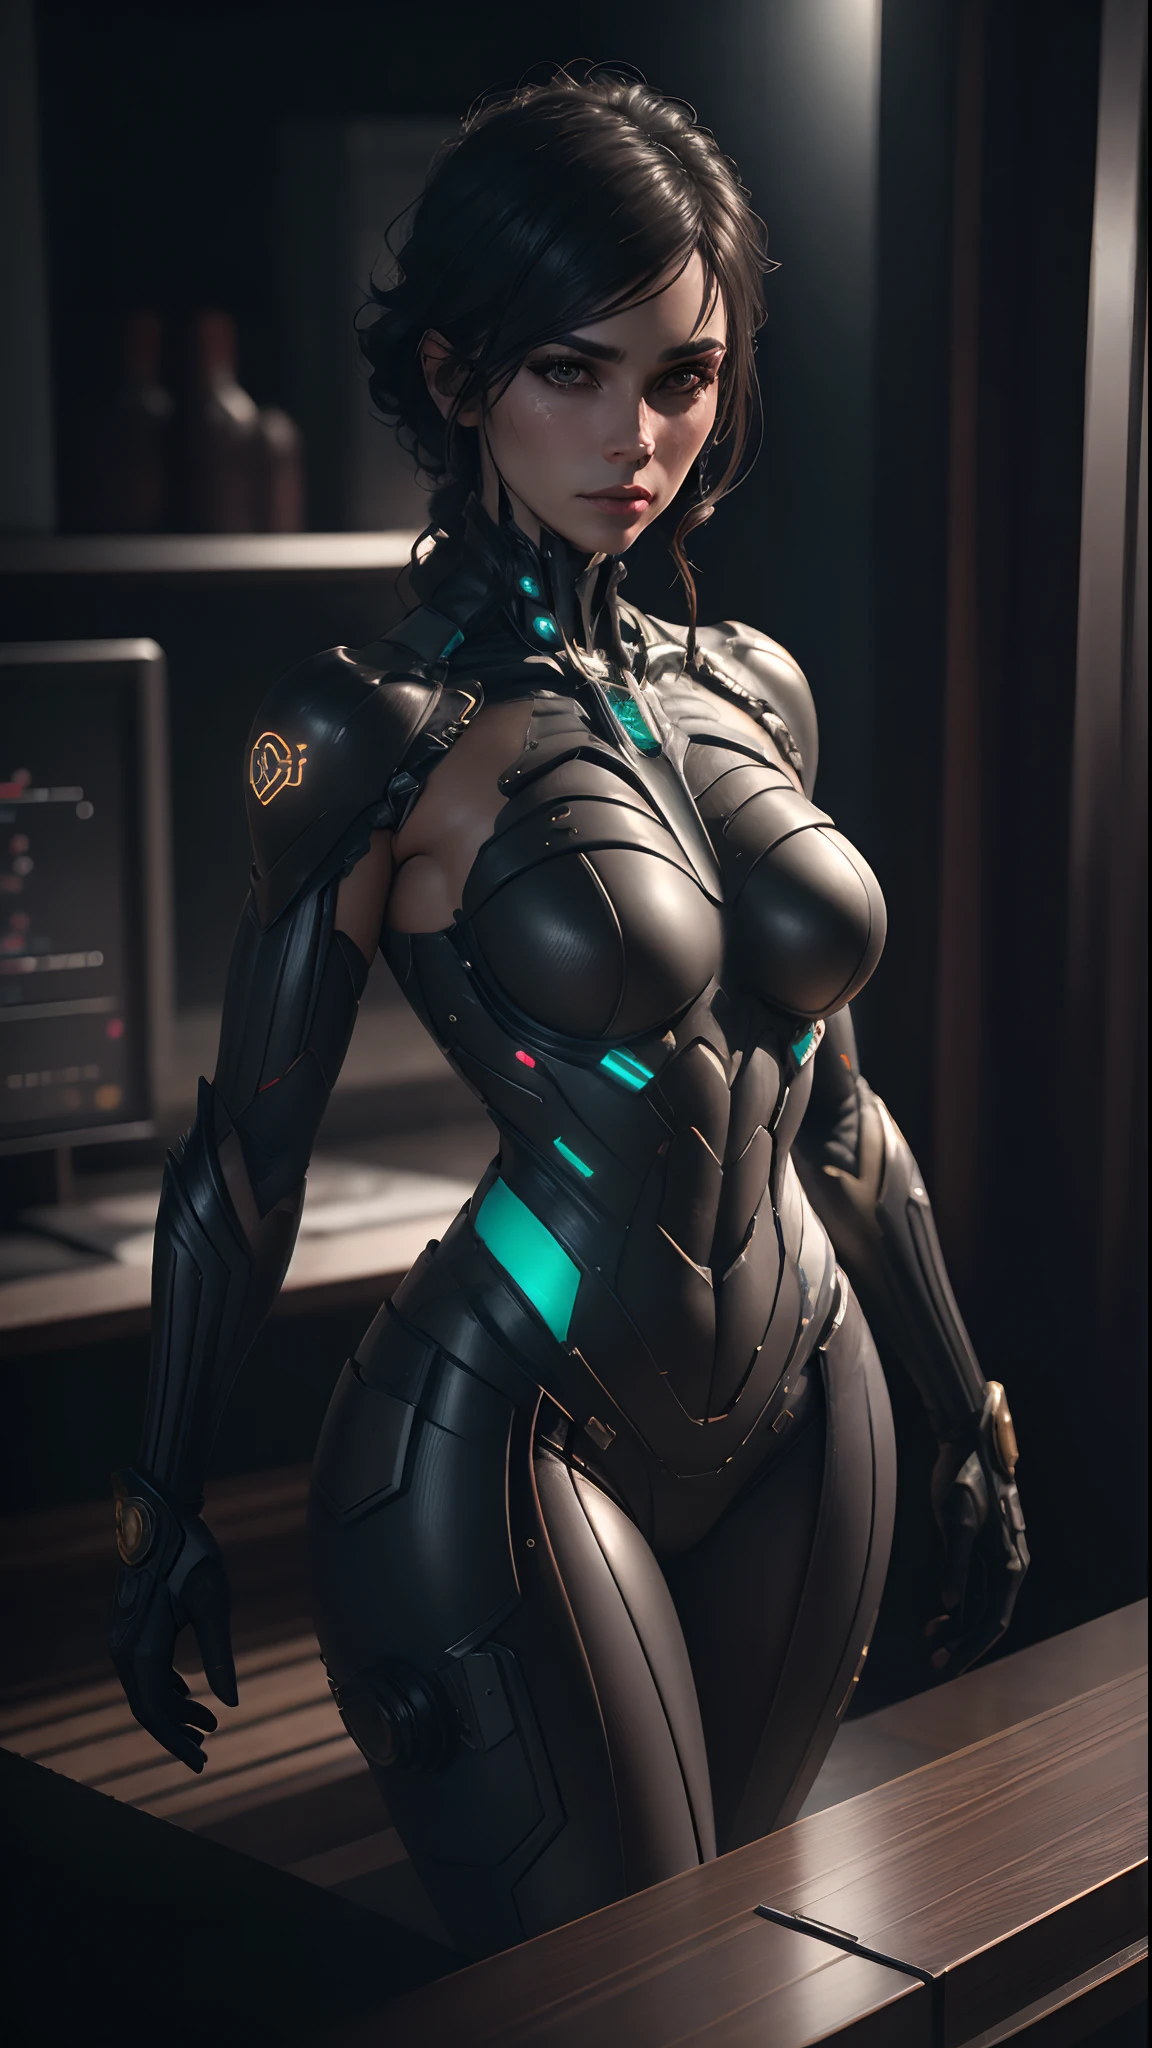 ((Best quality)), ((masterpiece)), (detailed:1.4), 3D, an image of a beautiful cyberpunk female, [[[[Hermiona Granger face]]]] HDR (High Dynamic Range),Ray Tracing,NVIDIA RTX,Super-Resolution,Unreal 5,Subsurface scattering,PBR Texturing,Post-processing,Anisotropic Filtering,Depth-of-field,Maximum clarity and sharpness,Multi-layered textures,Albedo and Specular maps,Surface shading,Accurate simulation of light-material interaction,Perfect proportions,Octane Render,Two-tone lighting,Wide aperture,Low ISO,White balance,Rule of thirds,8K RAW, crysisnanosuit, ceberpunk city in the background, neon lights